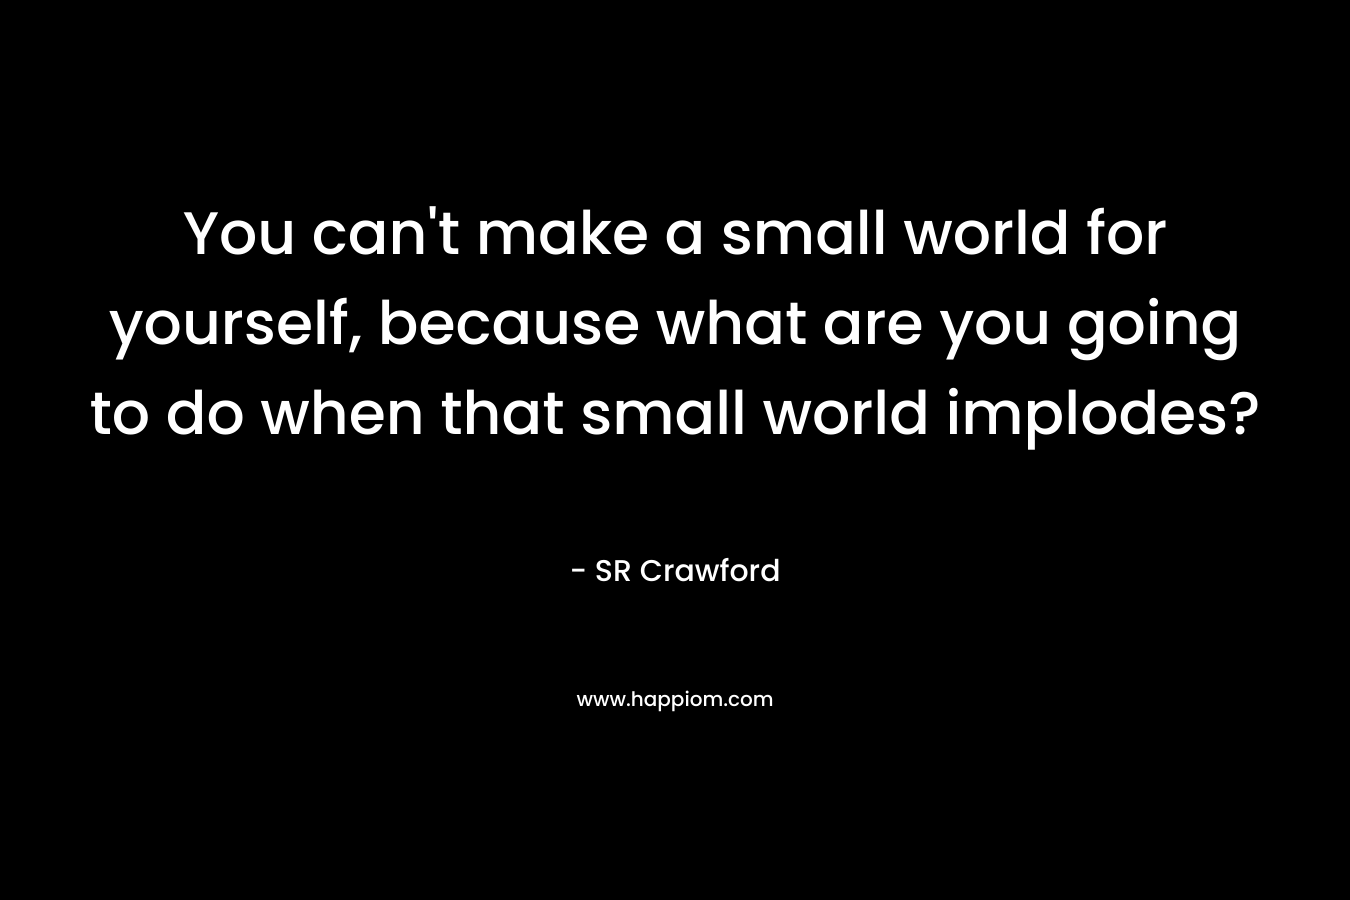 You can't make a small world for yourself, because what are you going to do when that small world implodes?